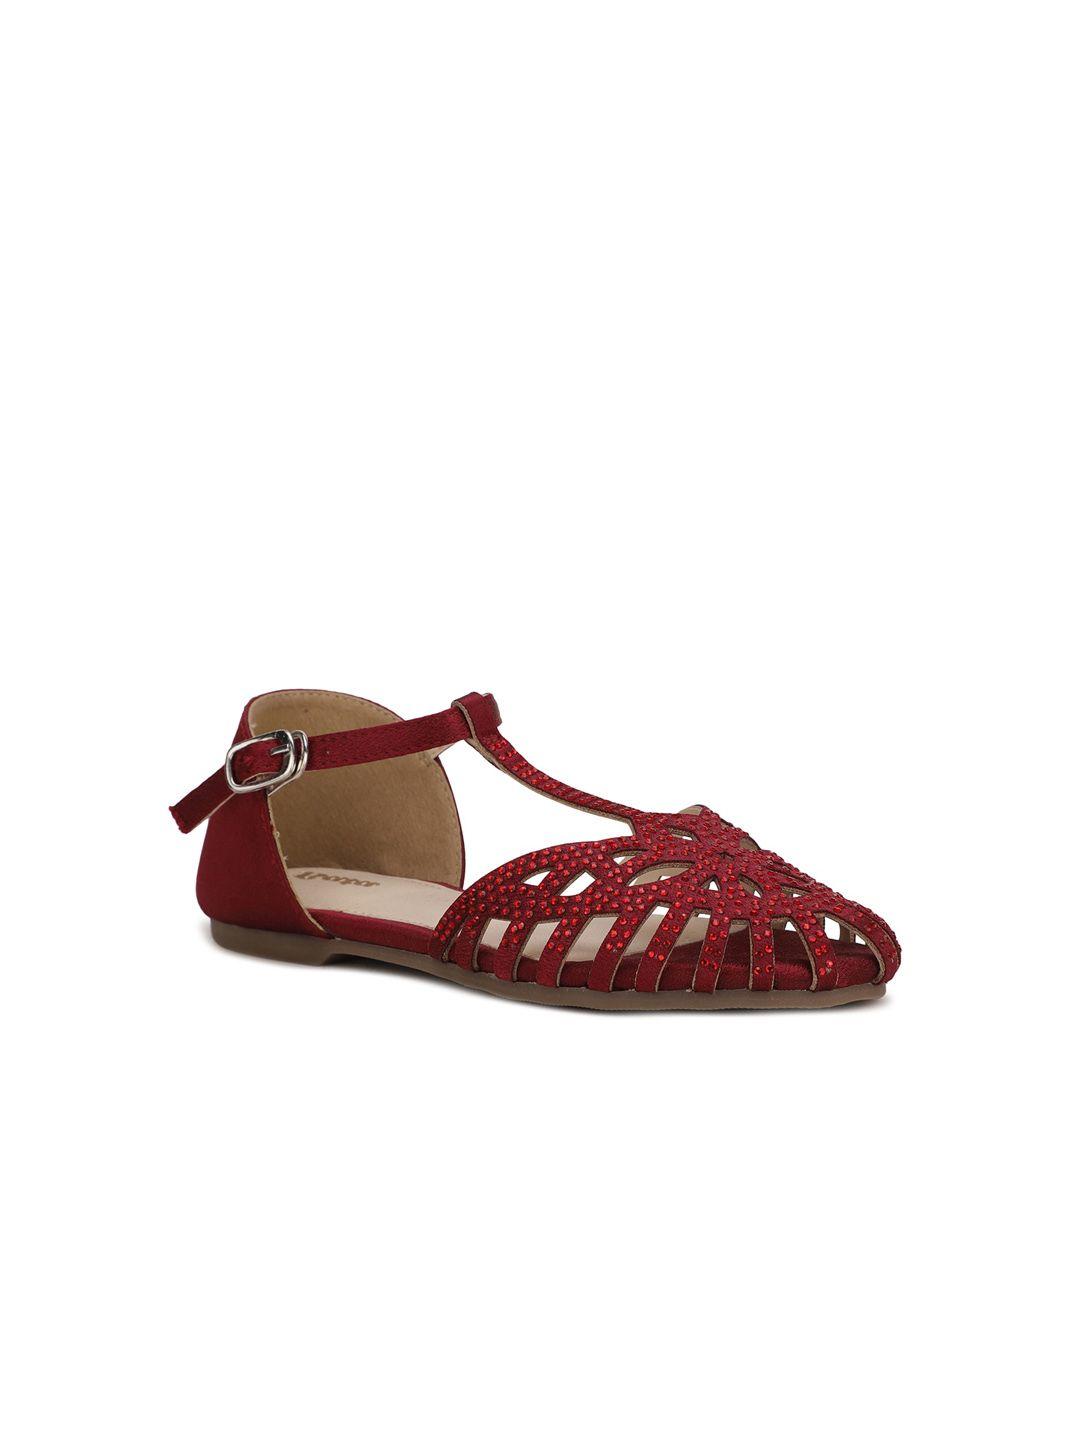 bata girls red embellished mules flats with laser cuts